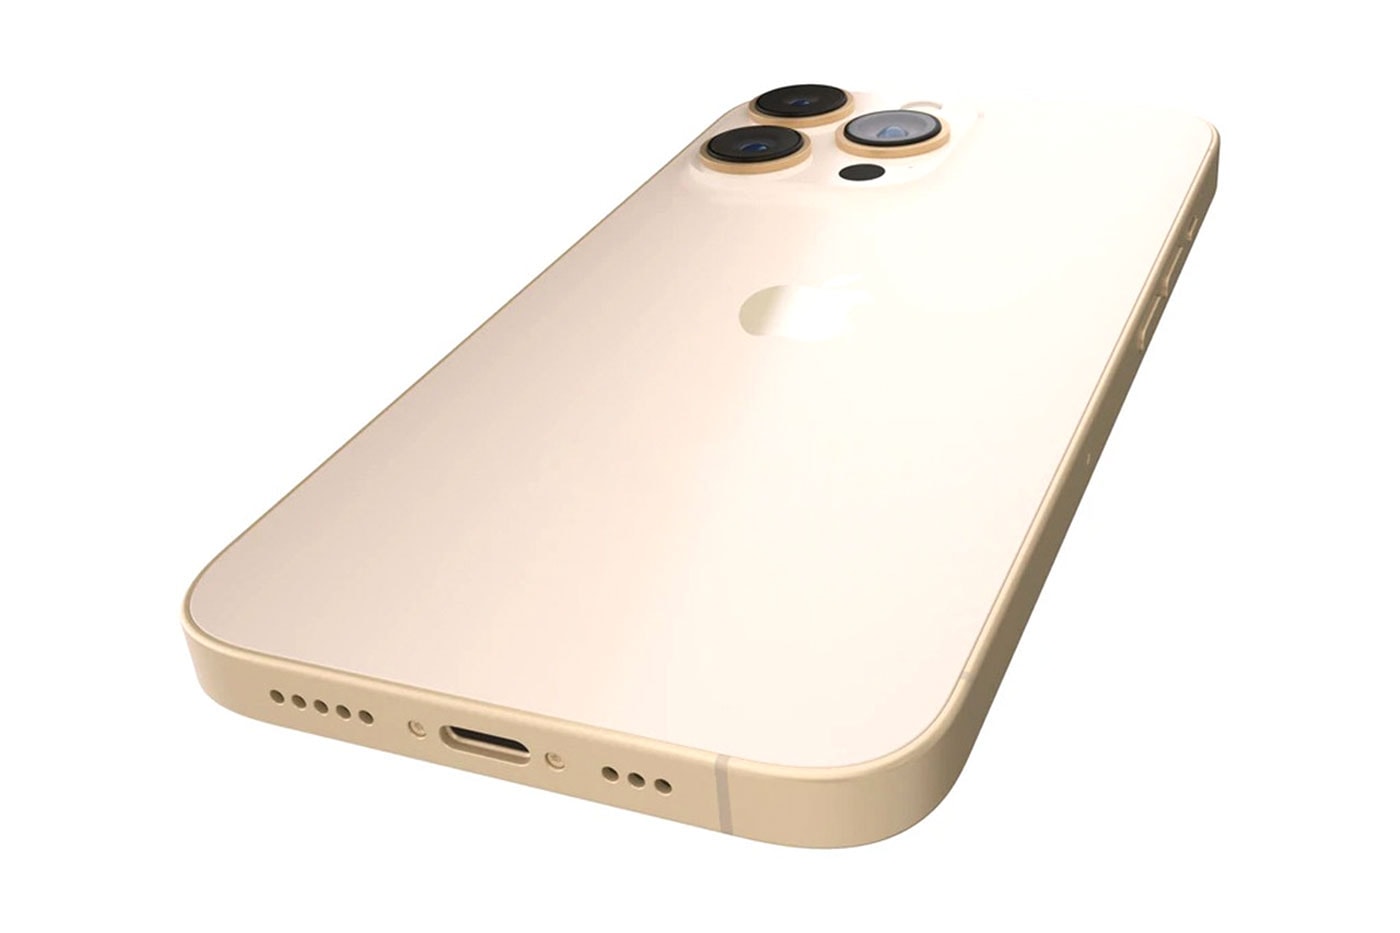 Concept Renderings for the Apple iPhone 14 Pro Have Surfaced Online Gold iphone pigtou xleaks7 punch-hole camera pill-shaped face id sensor screen t0 body ratio 